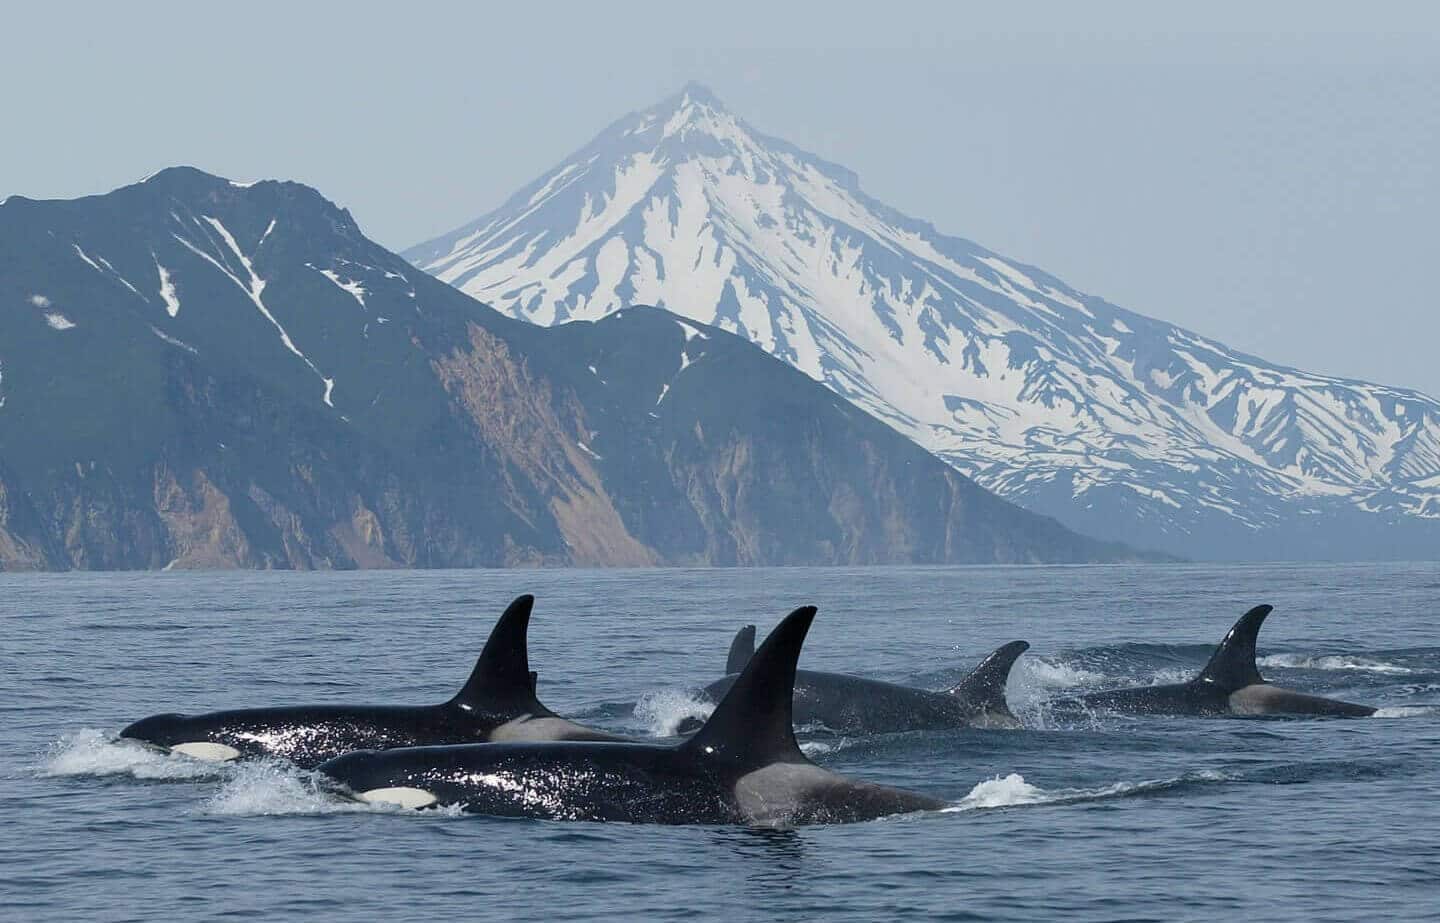 Group of orcas off Kamchatka, Russia